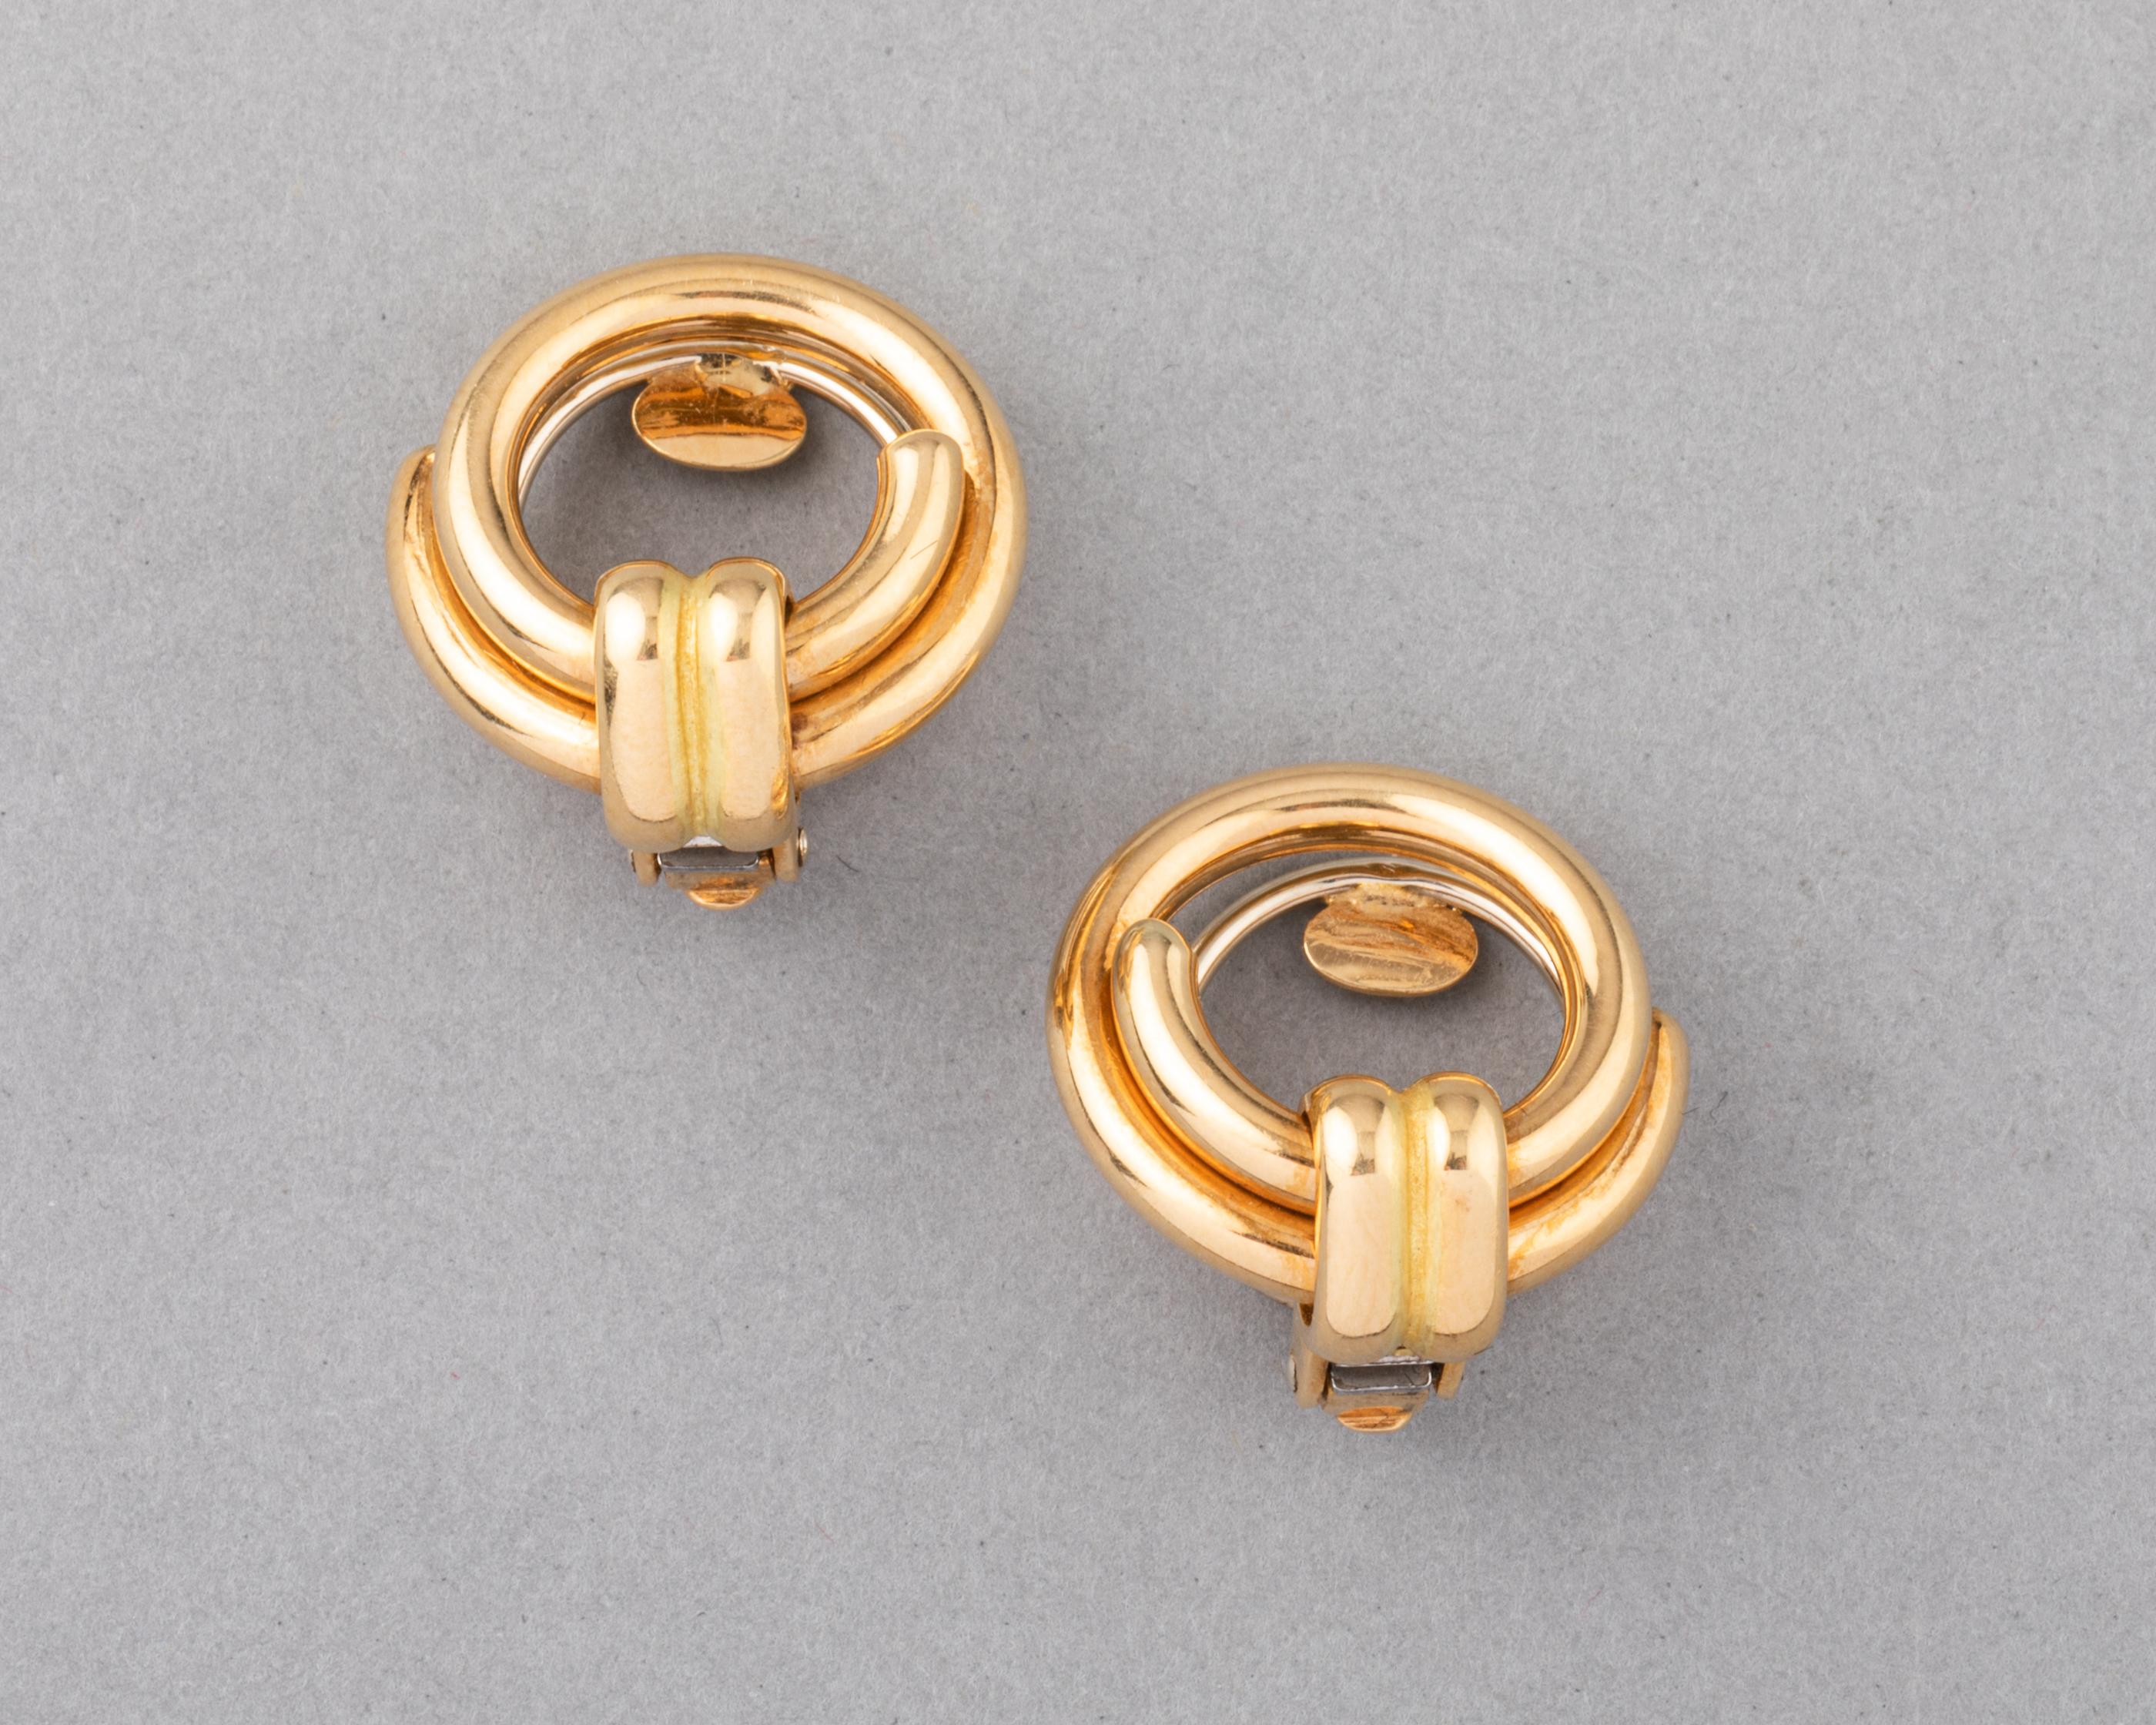 Lovely pair of vintage gold earrings, signed by Chaumet PARIS.

Made in yellow gold 18k. The diameter is 17mm.

Total weight: 11.90 grams.